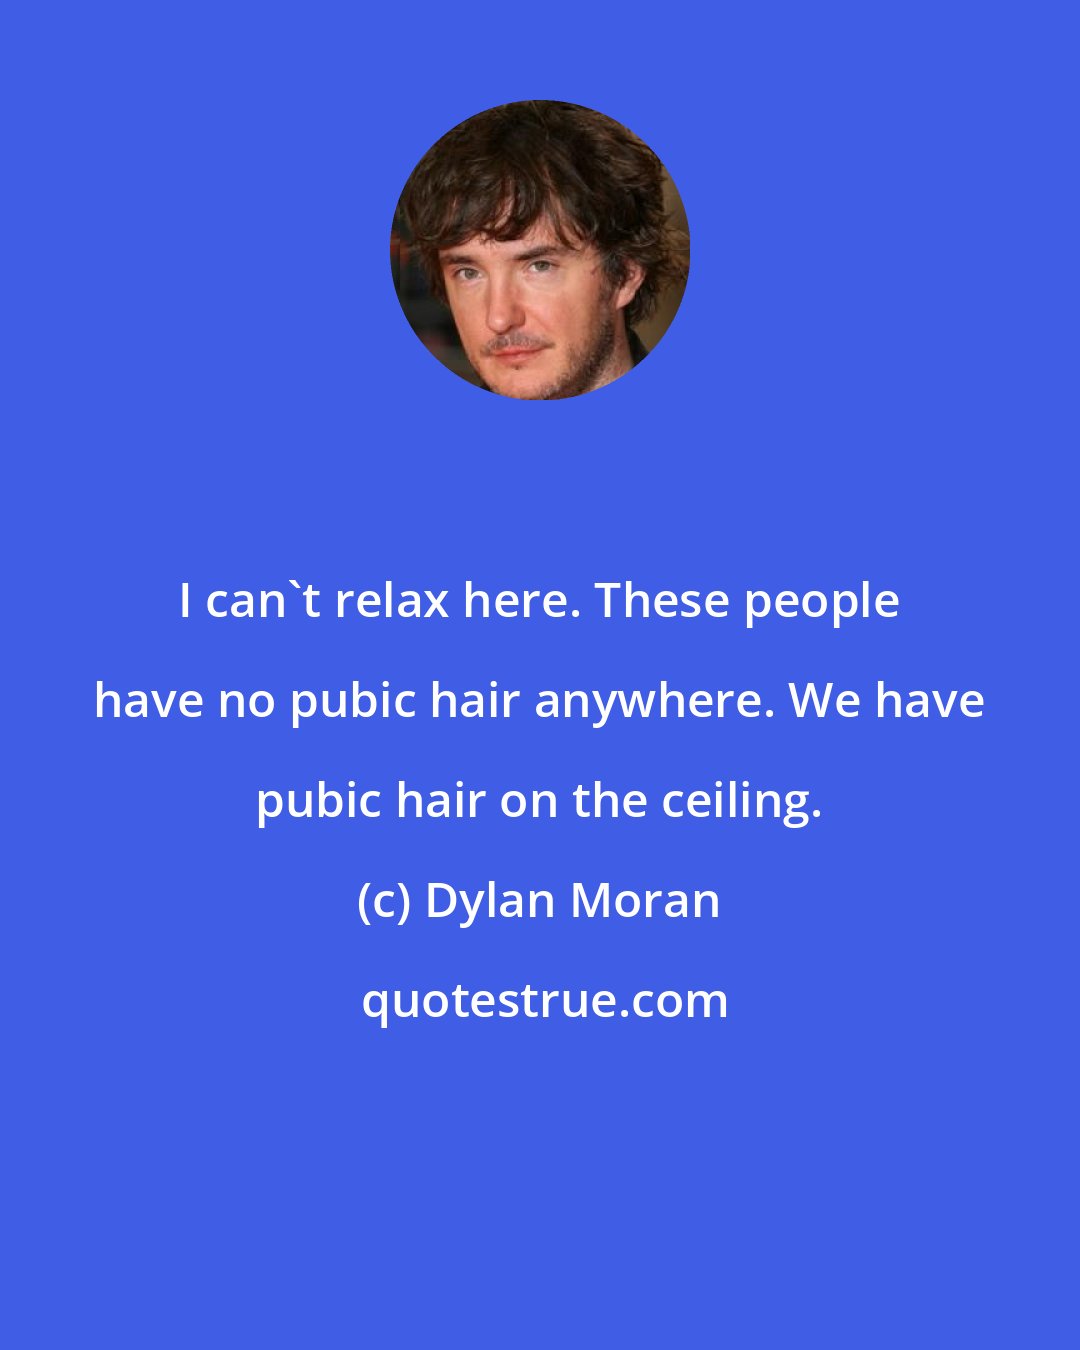 Dylan Moran: I can't relax here. These people have no pubic hair anywhere. We have pubic hair on the ceiling.